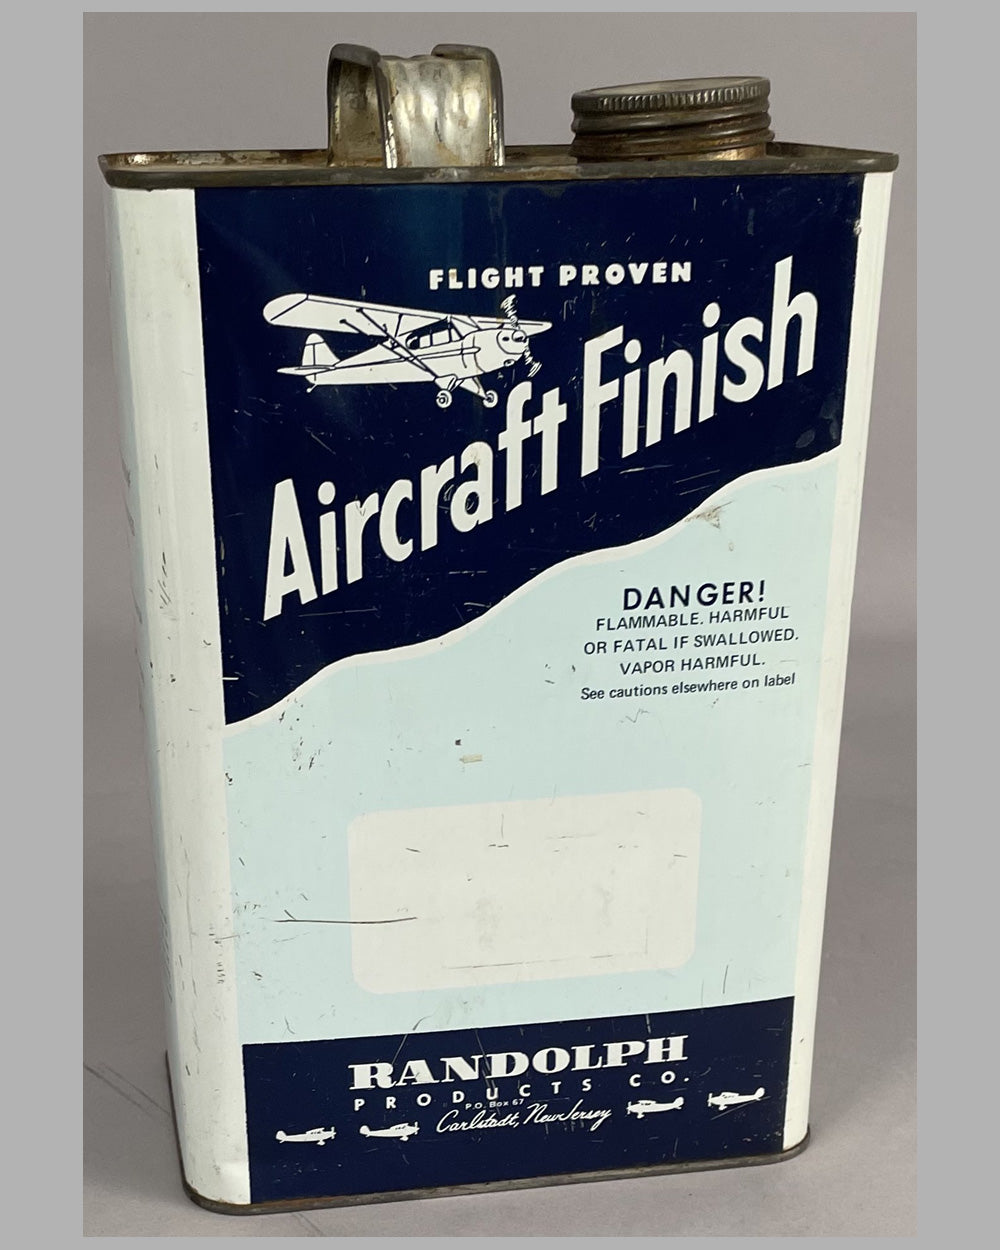 Aircraft Finish tin can by the Randolph Co.